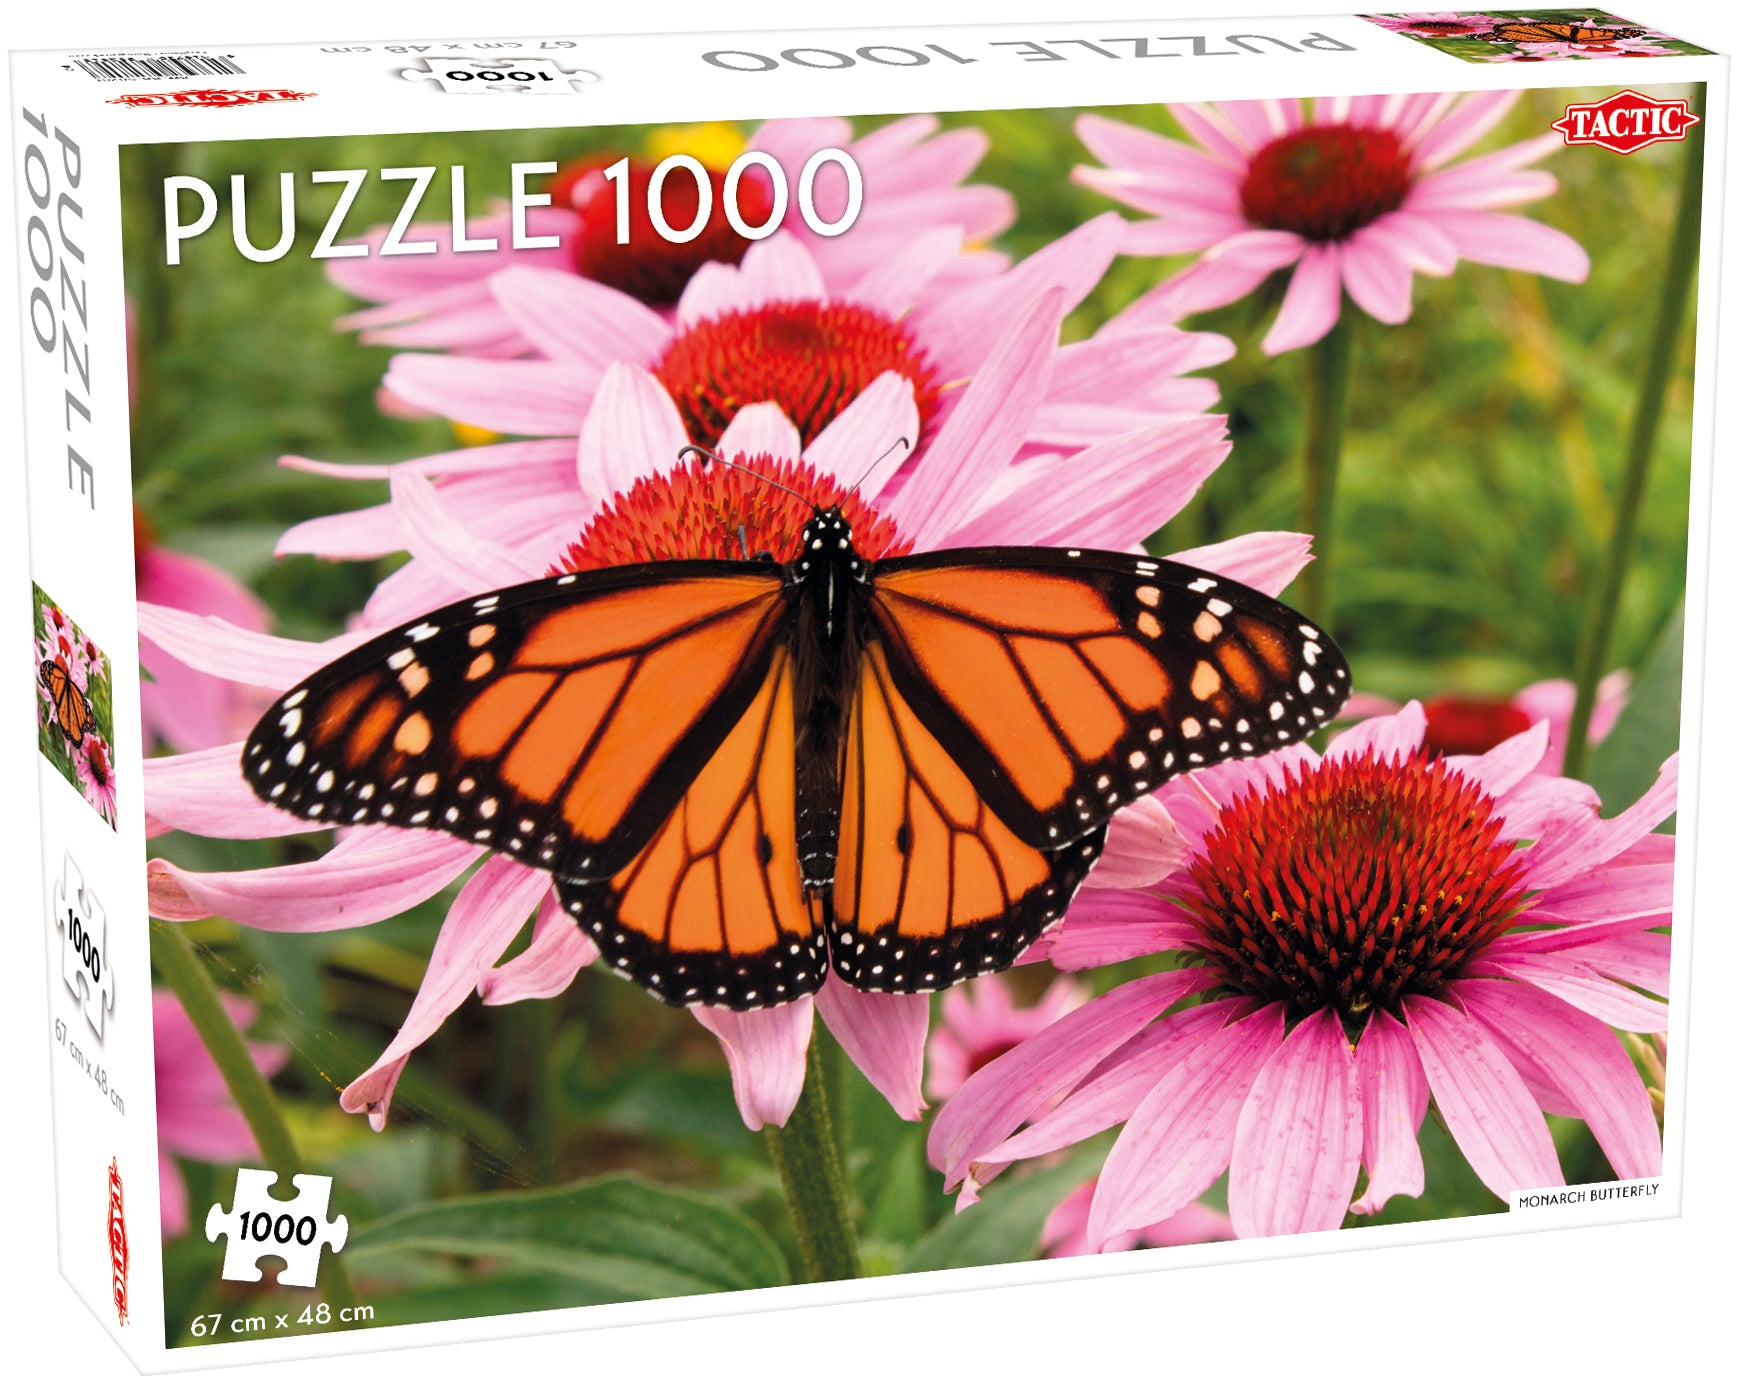 Tactic Puzzle 1000 pc Monarch Butterfly